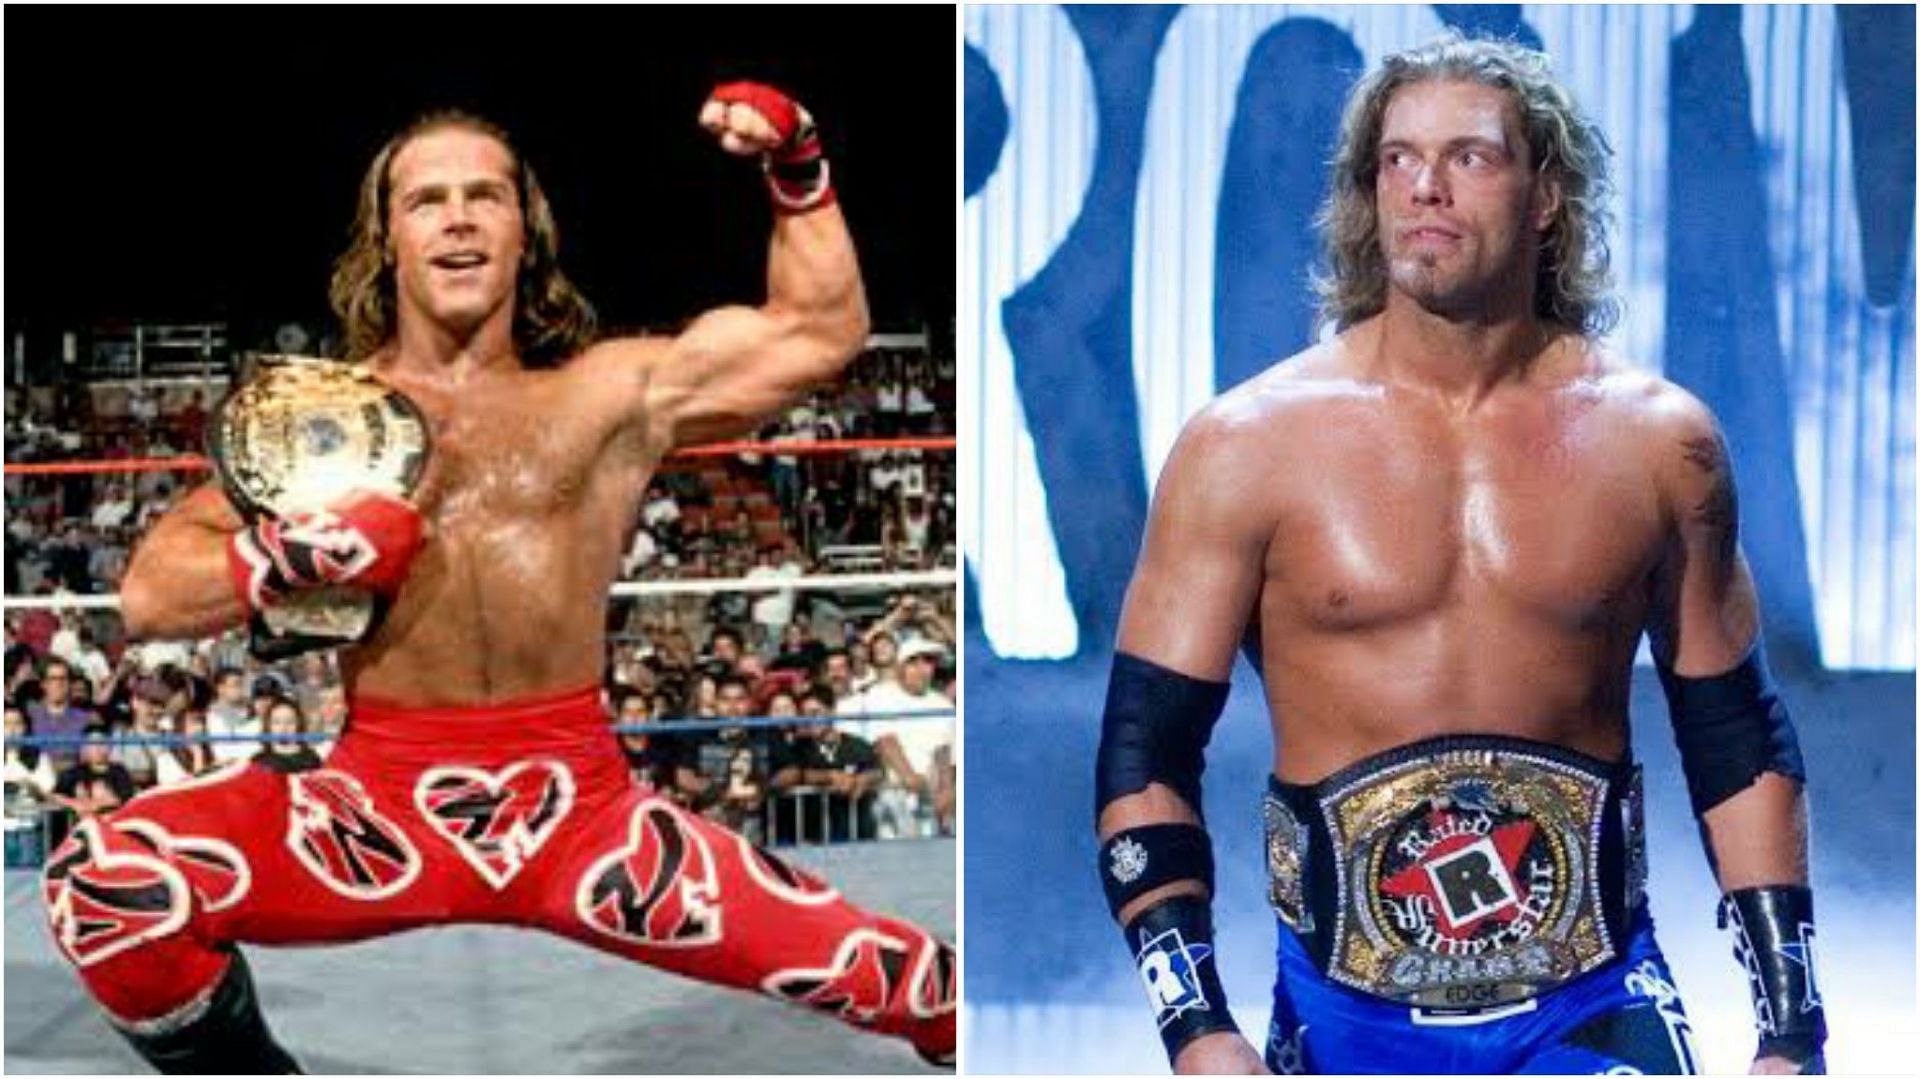 Shawn Michaels and Edge achieved success in both singles and tag team divisions.